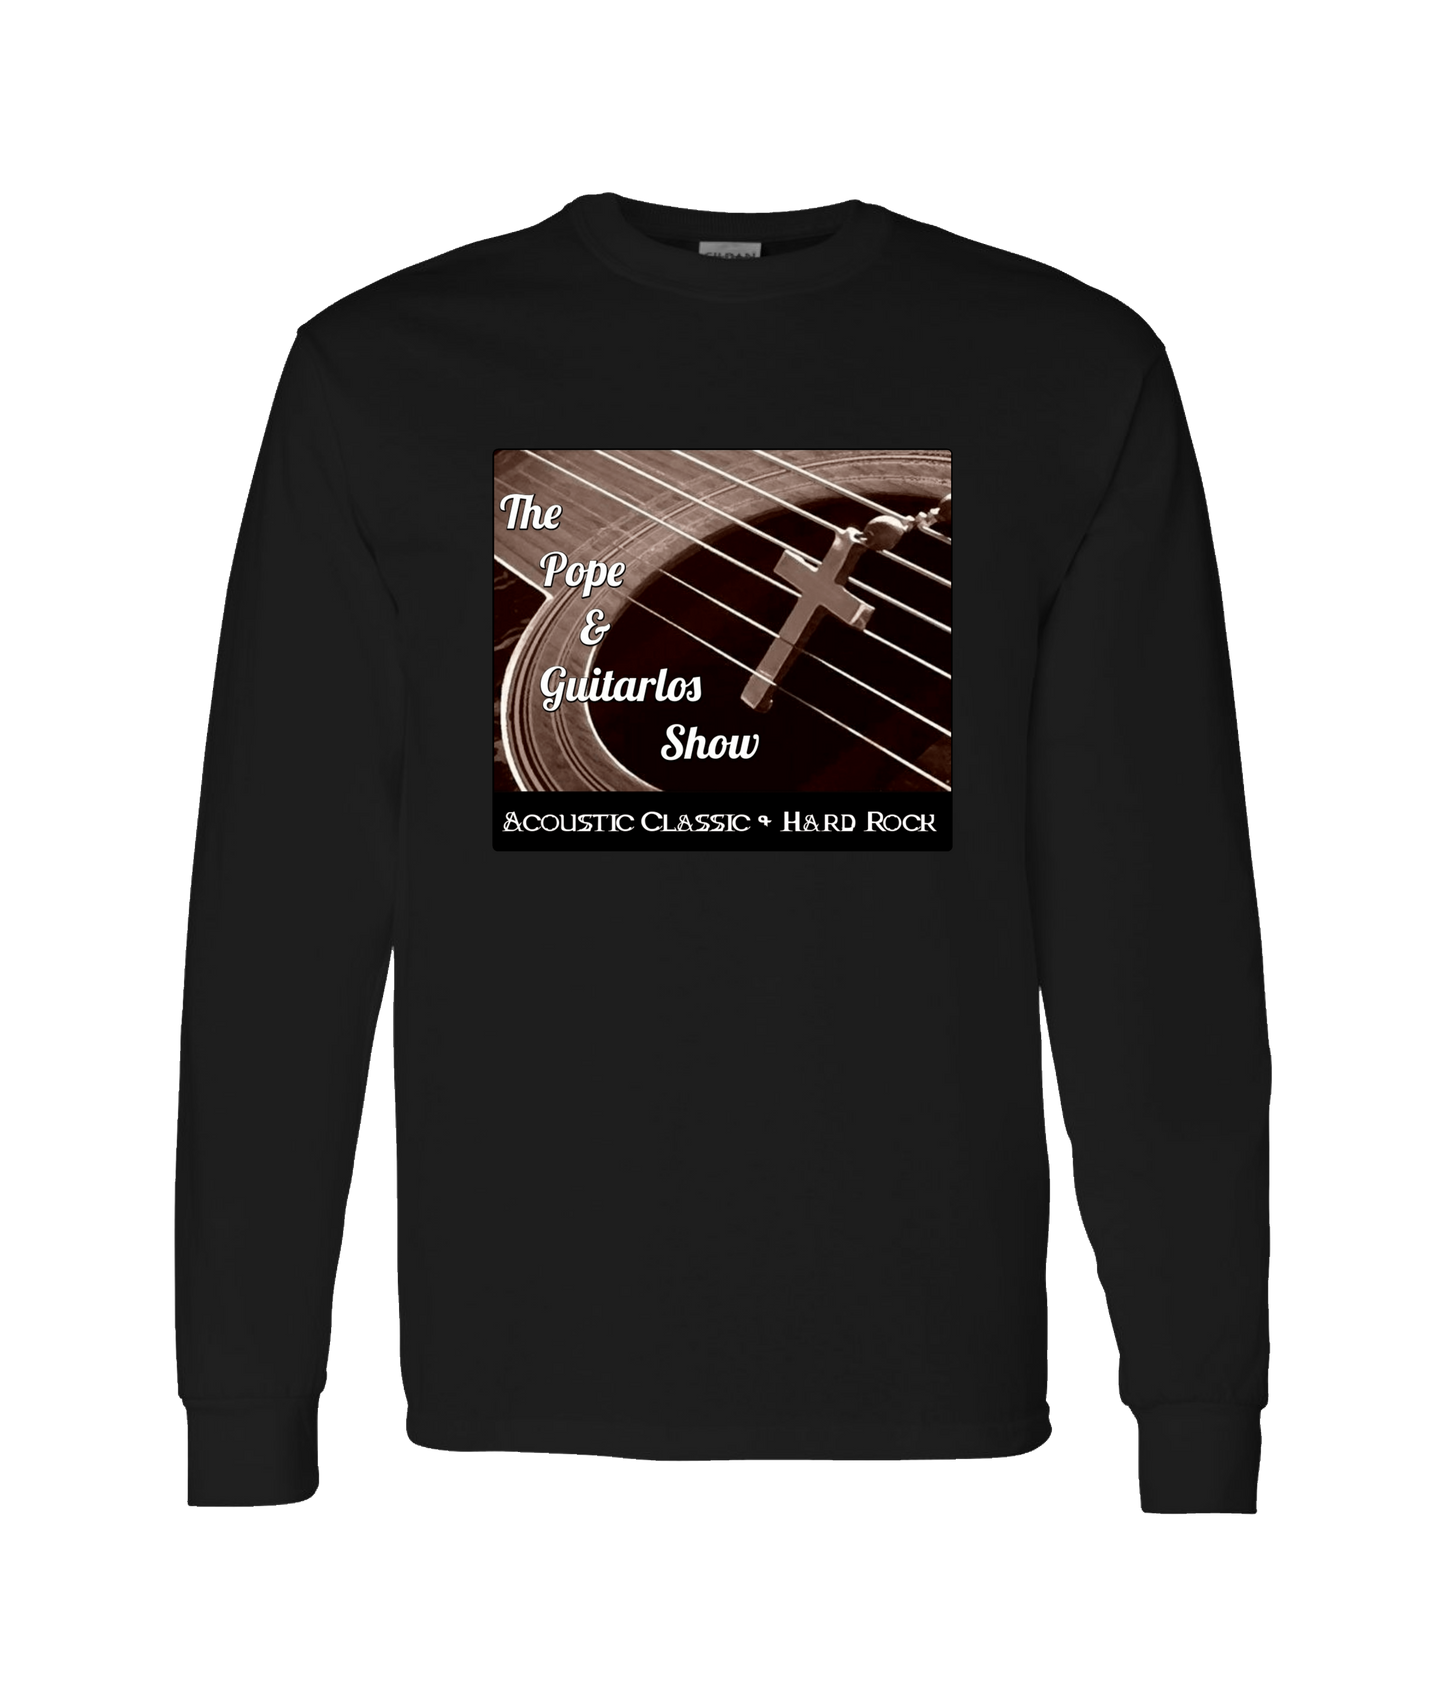 The Pope and Guitarlos Show - Guitar Cross - Black Long Sleeve T